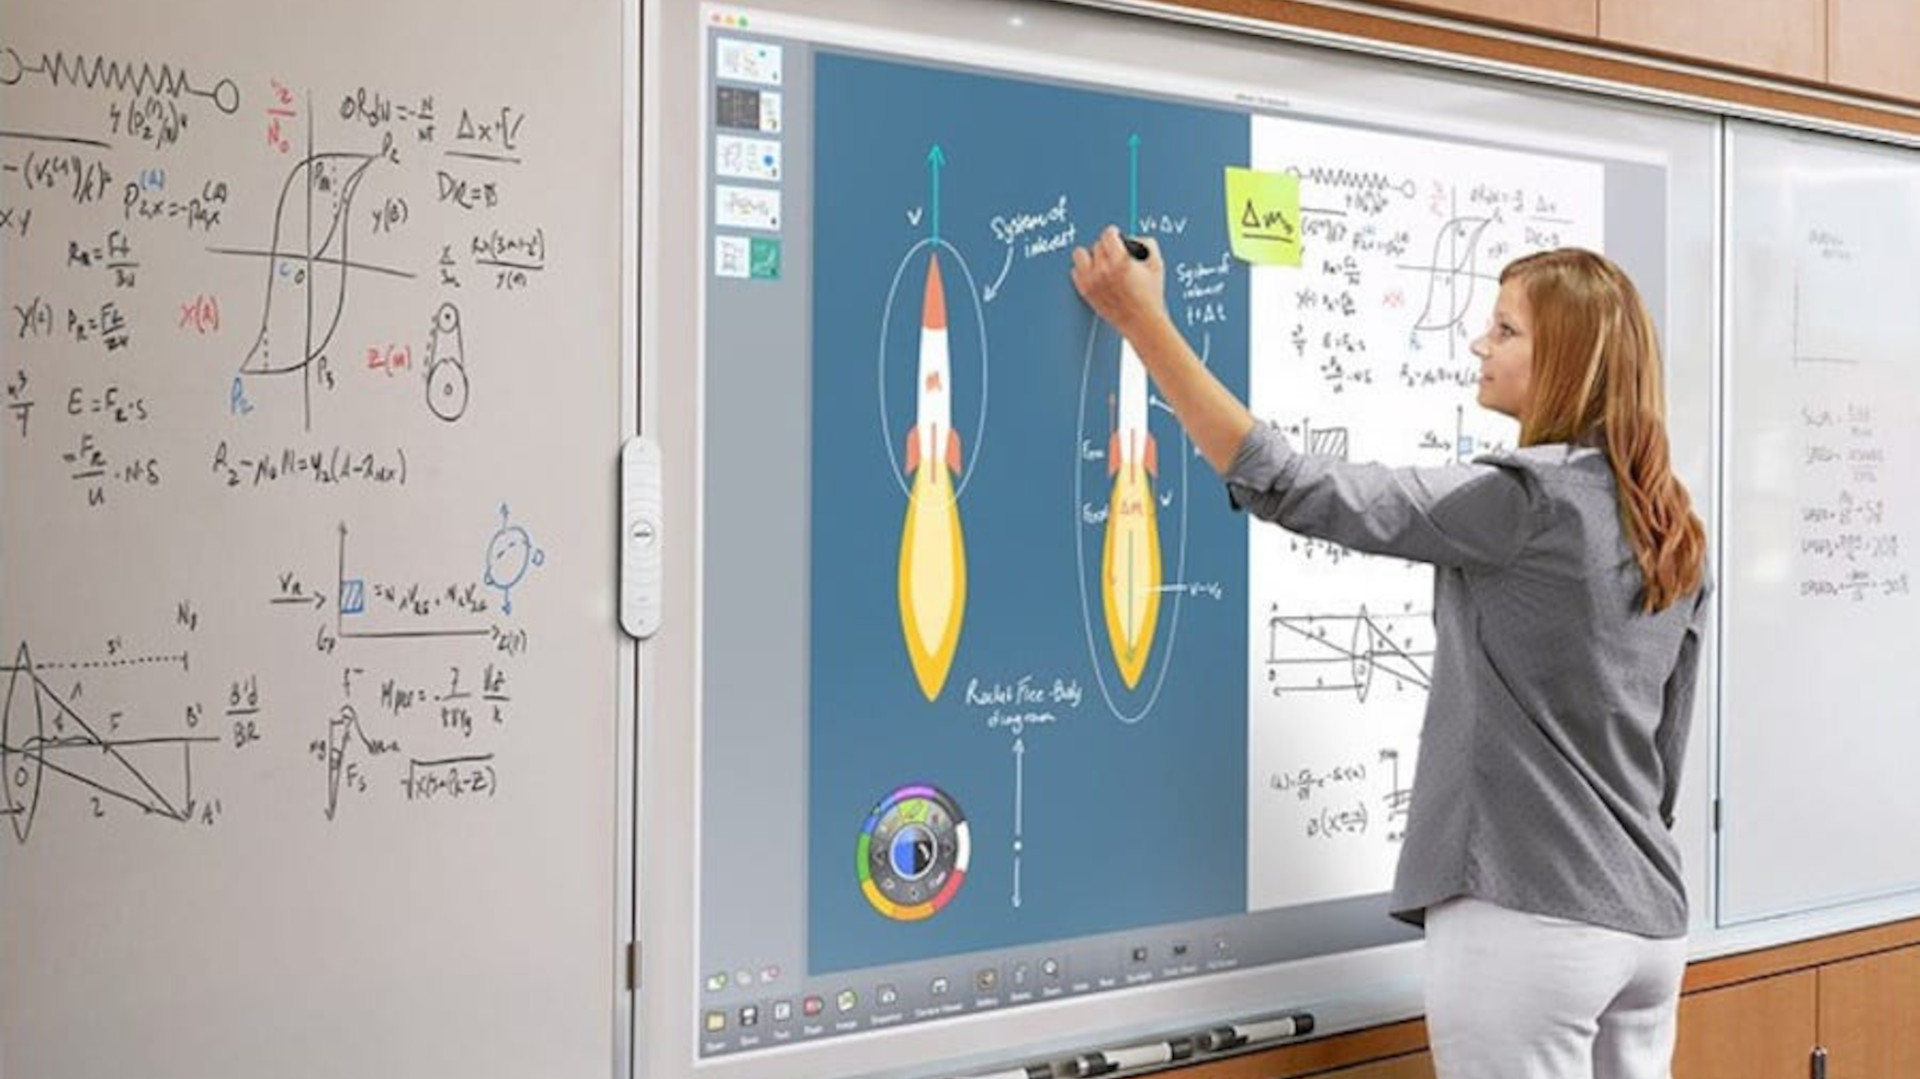 Best Interactive Whiteboards For Schools Tech And Learning